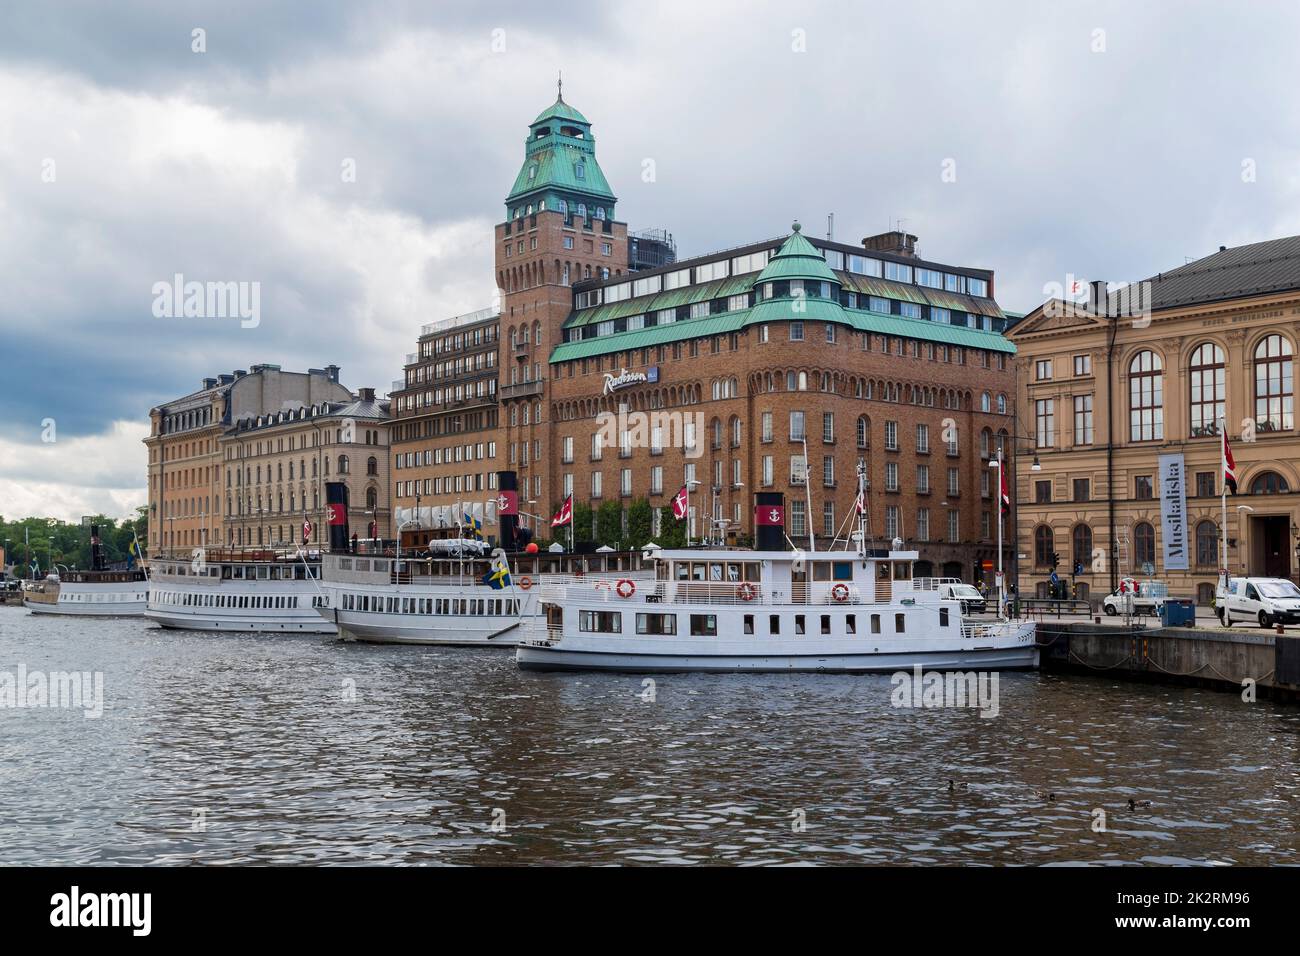 STOCKHOLM, SWEDEN - JUNE 28, 2016: Cove Nybroviken in the central part of the city is the starting point for a voyage on the Stockholm archipelago. Stock Photo